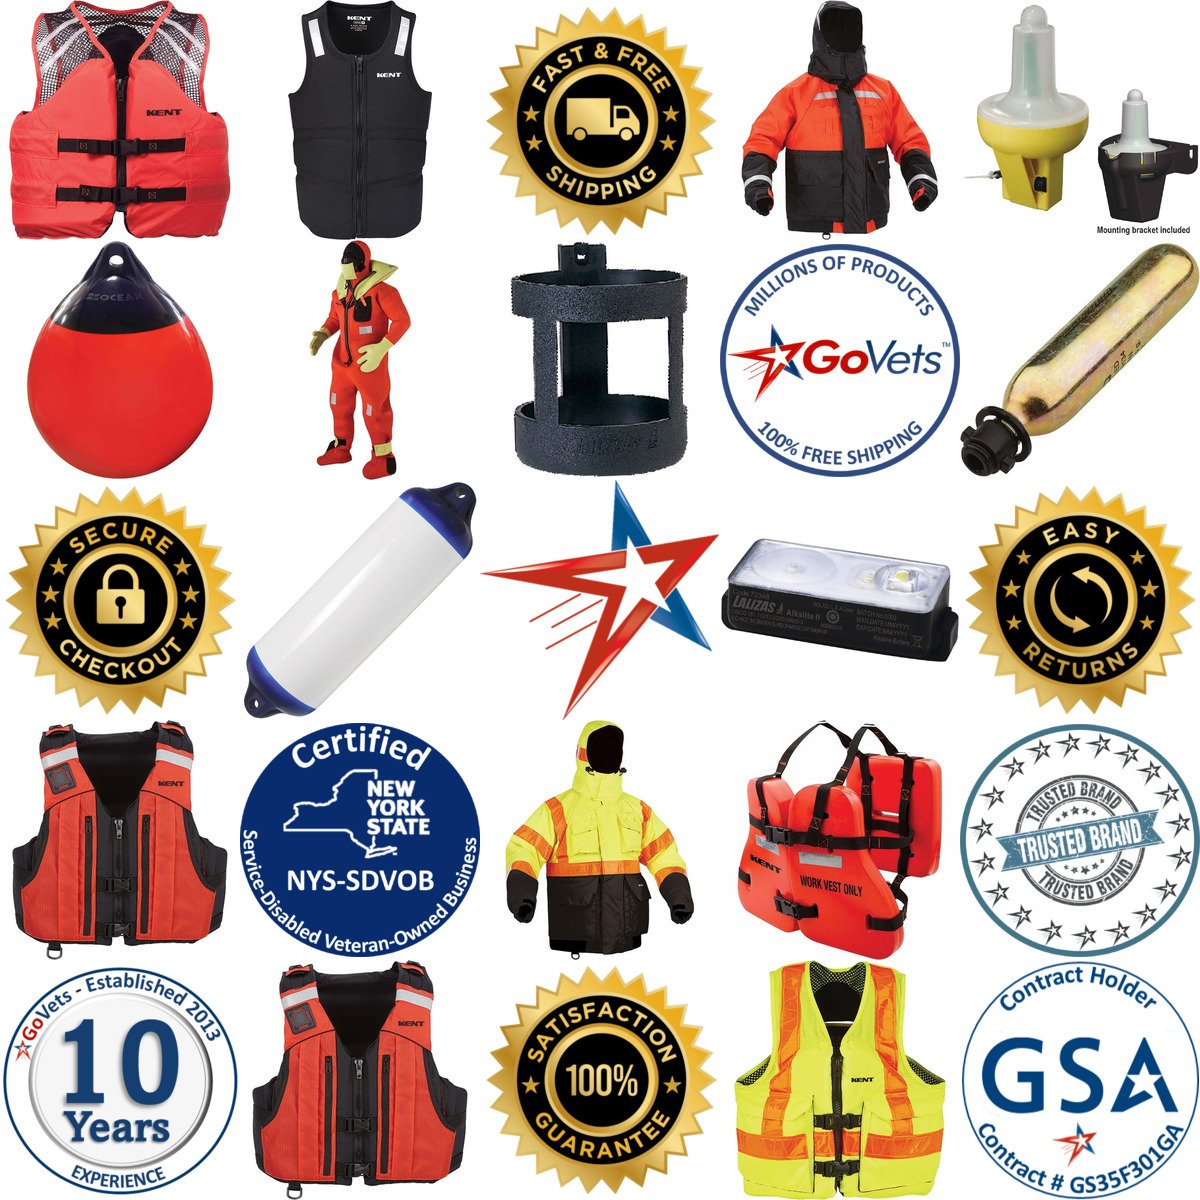 A selection of Water Safety products on GoVets